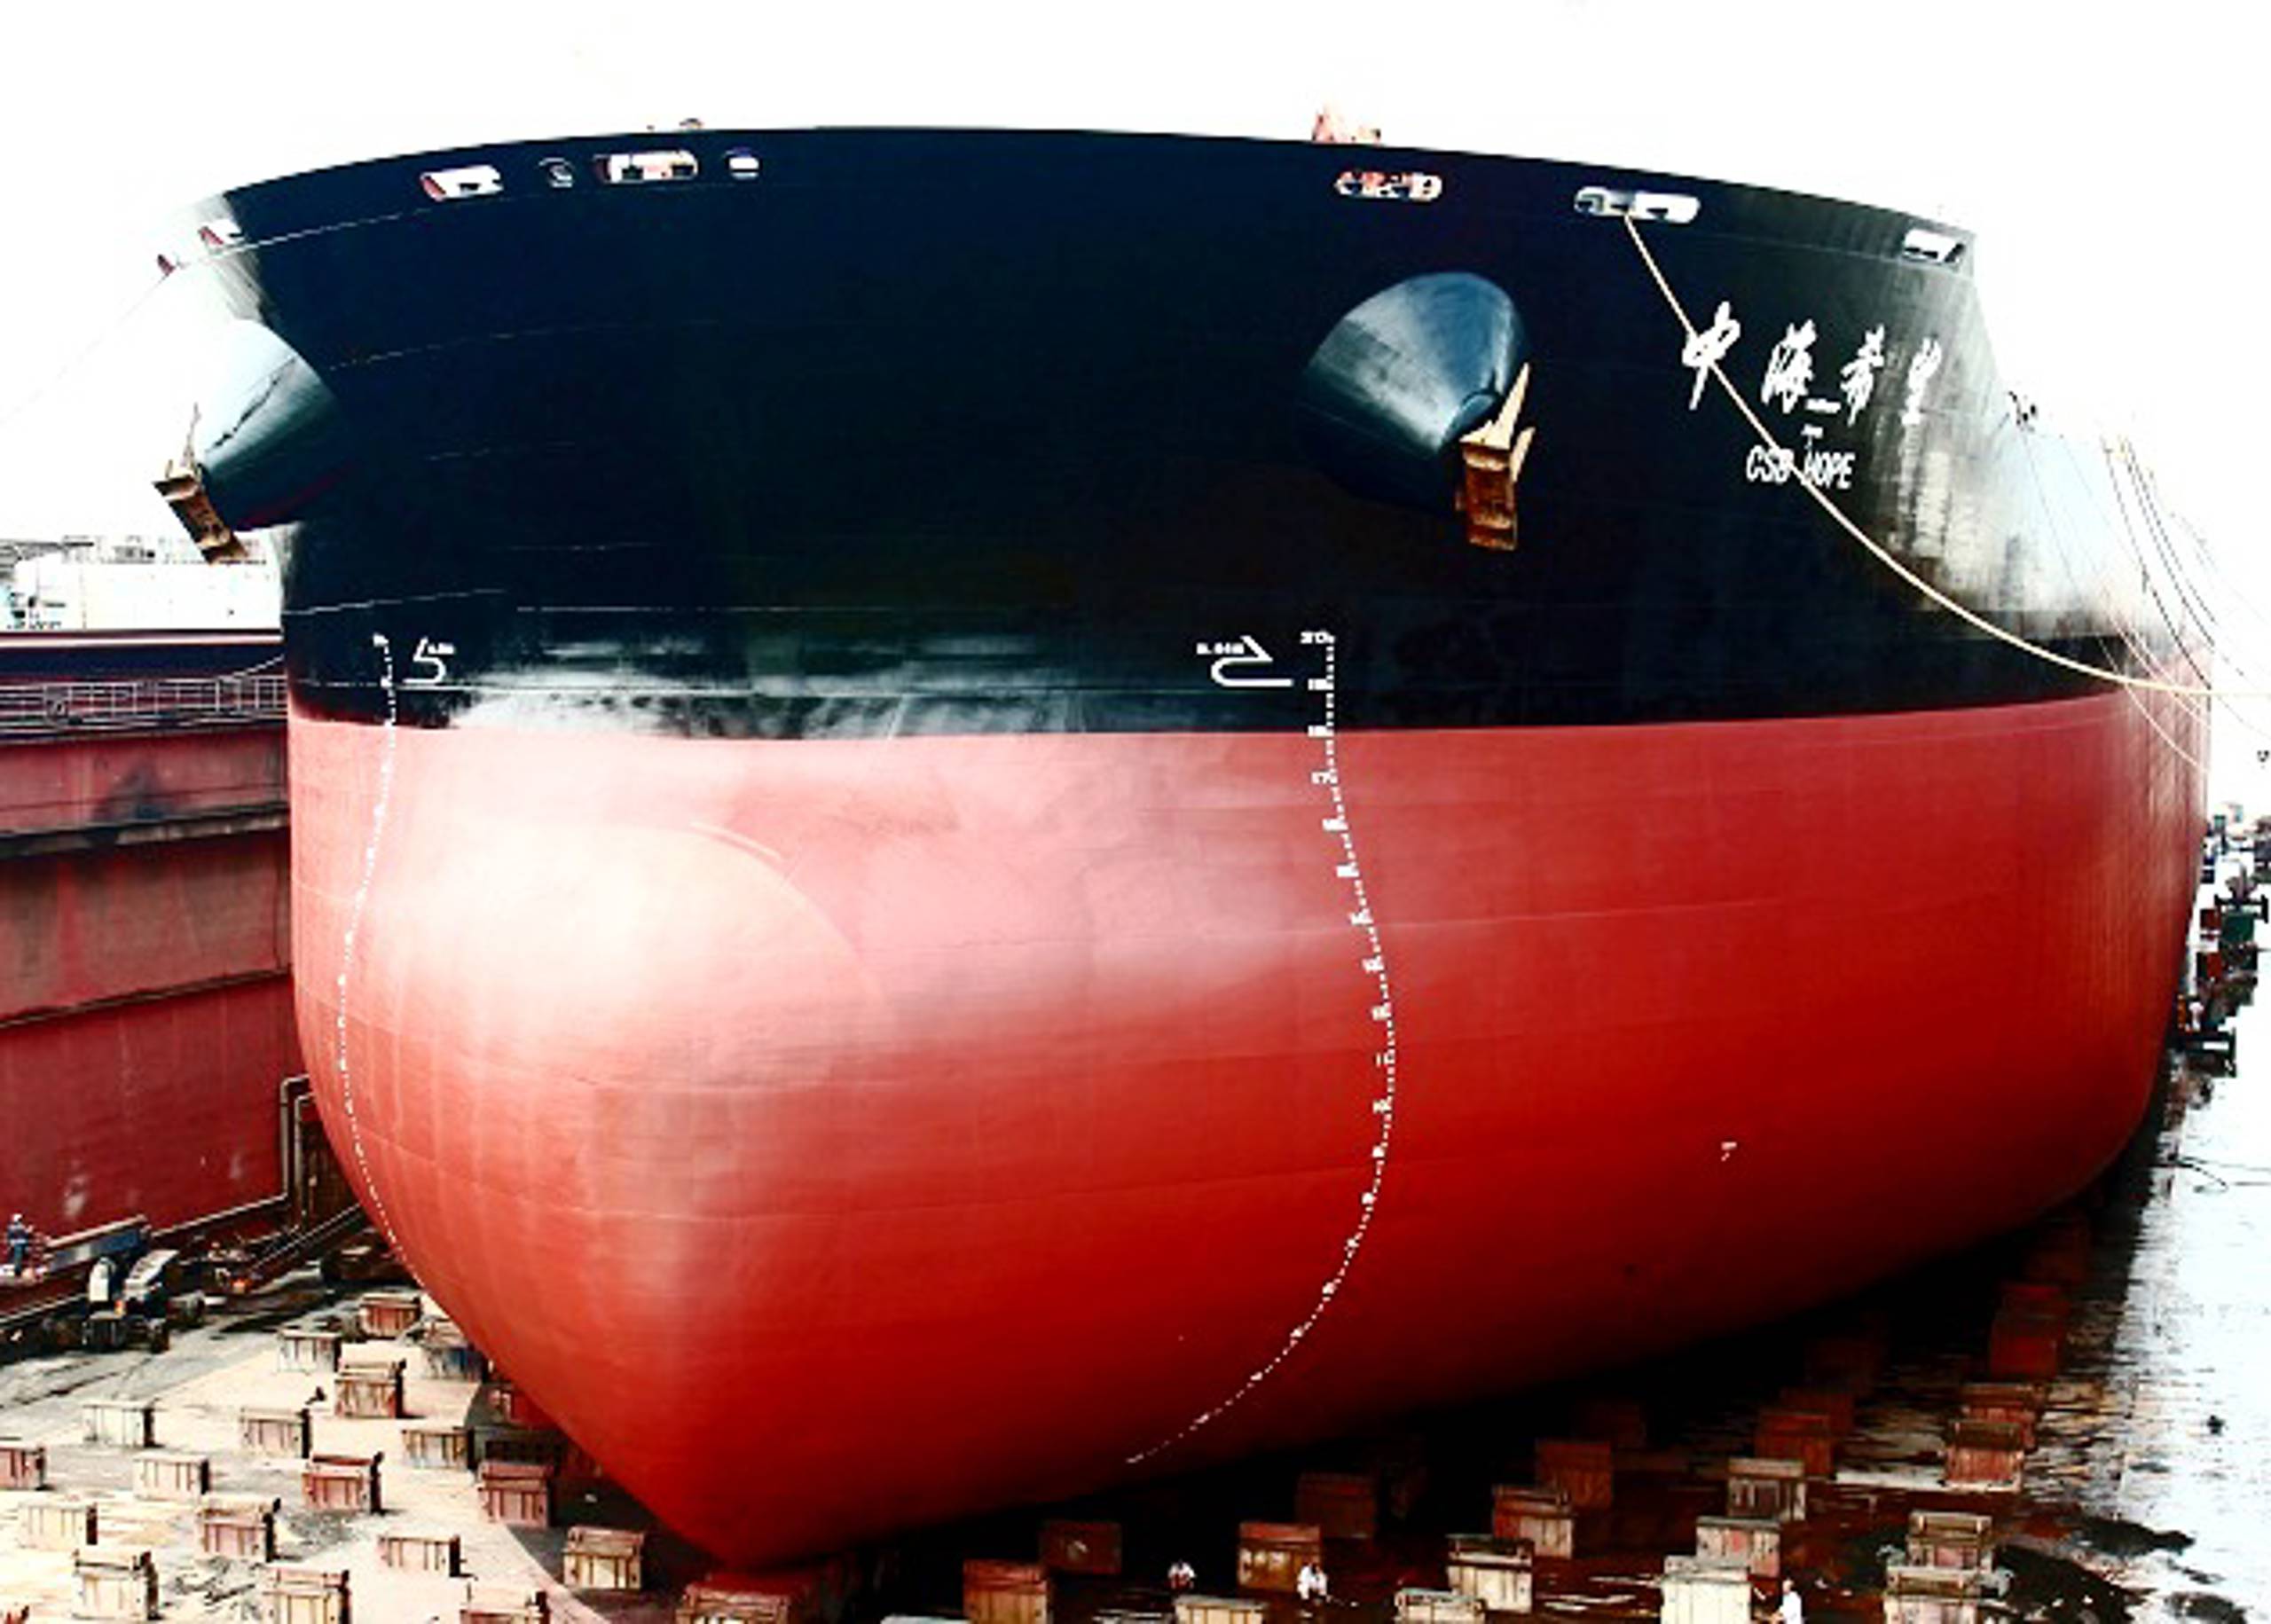 CSB Hope in drydock – Jotun reference. Photo credit: China Shipping Bulk Carrier Co., Ltd.